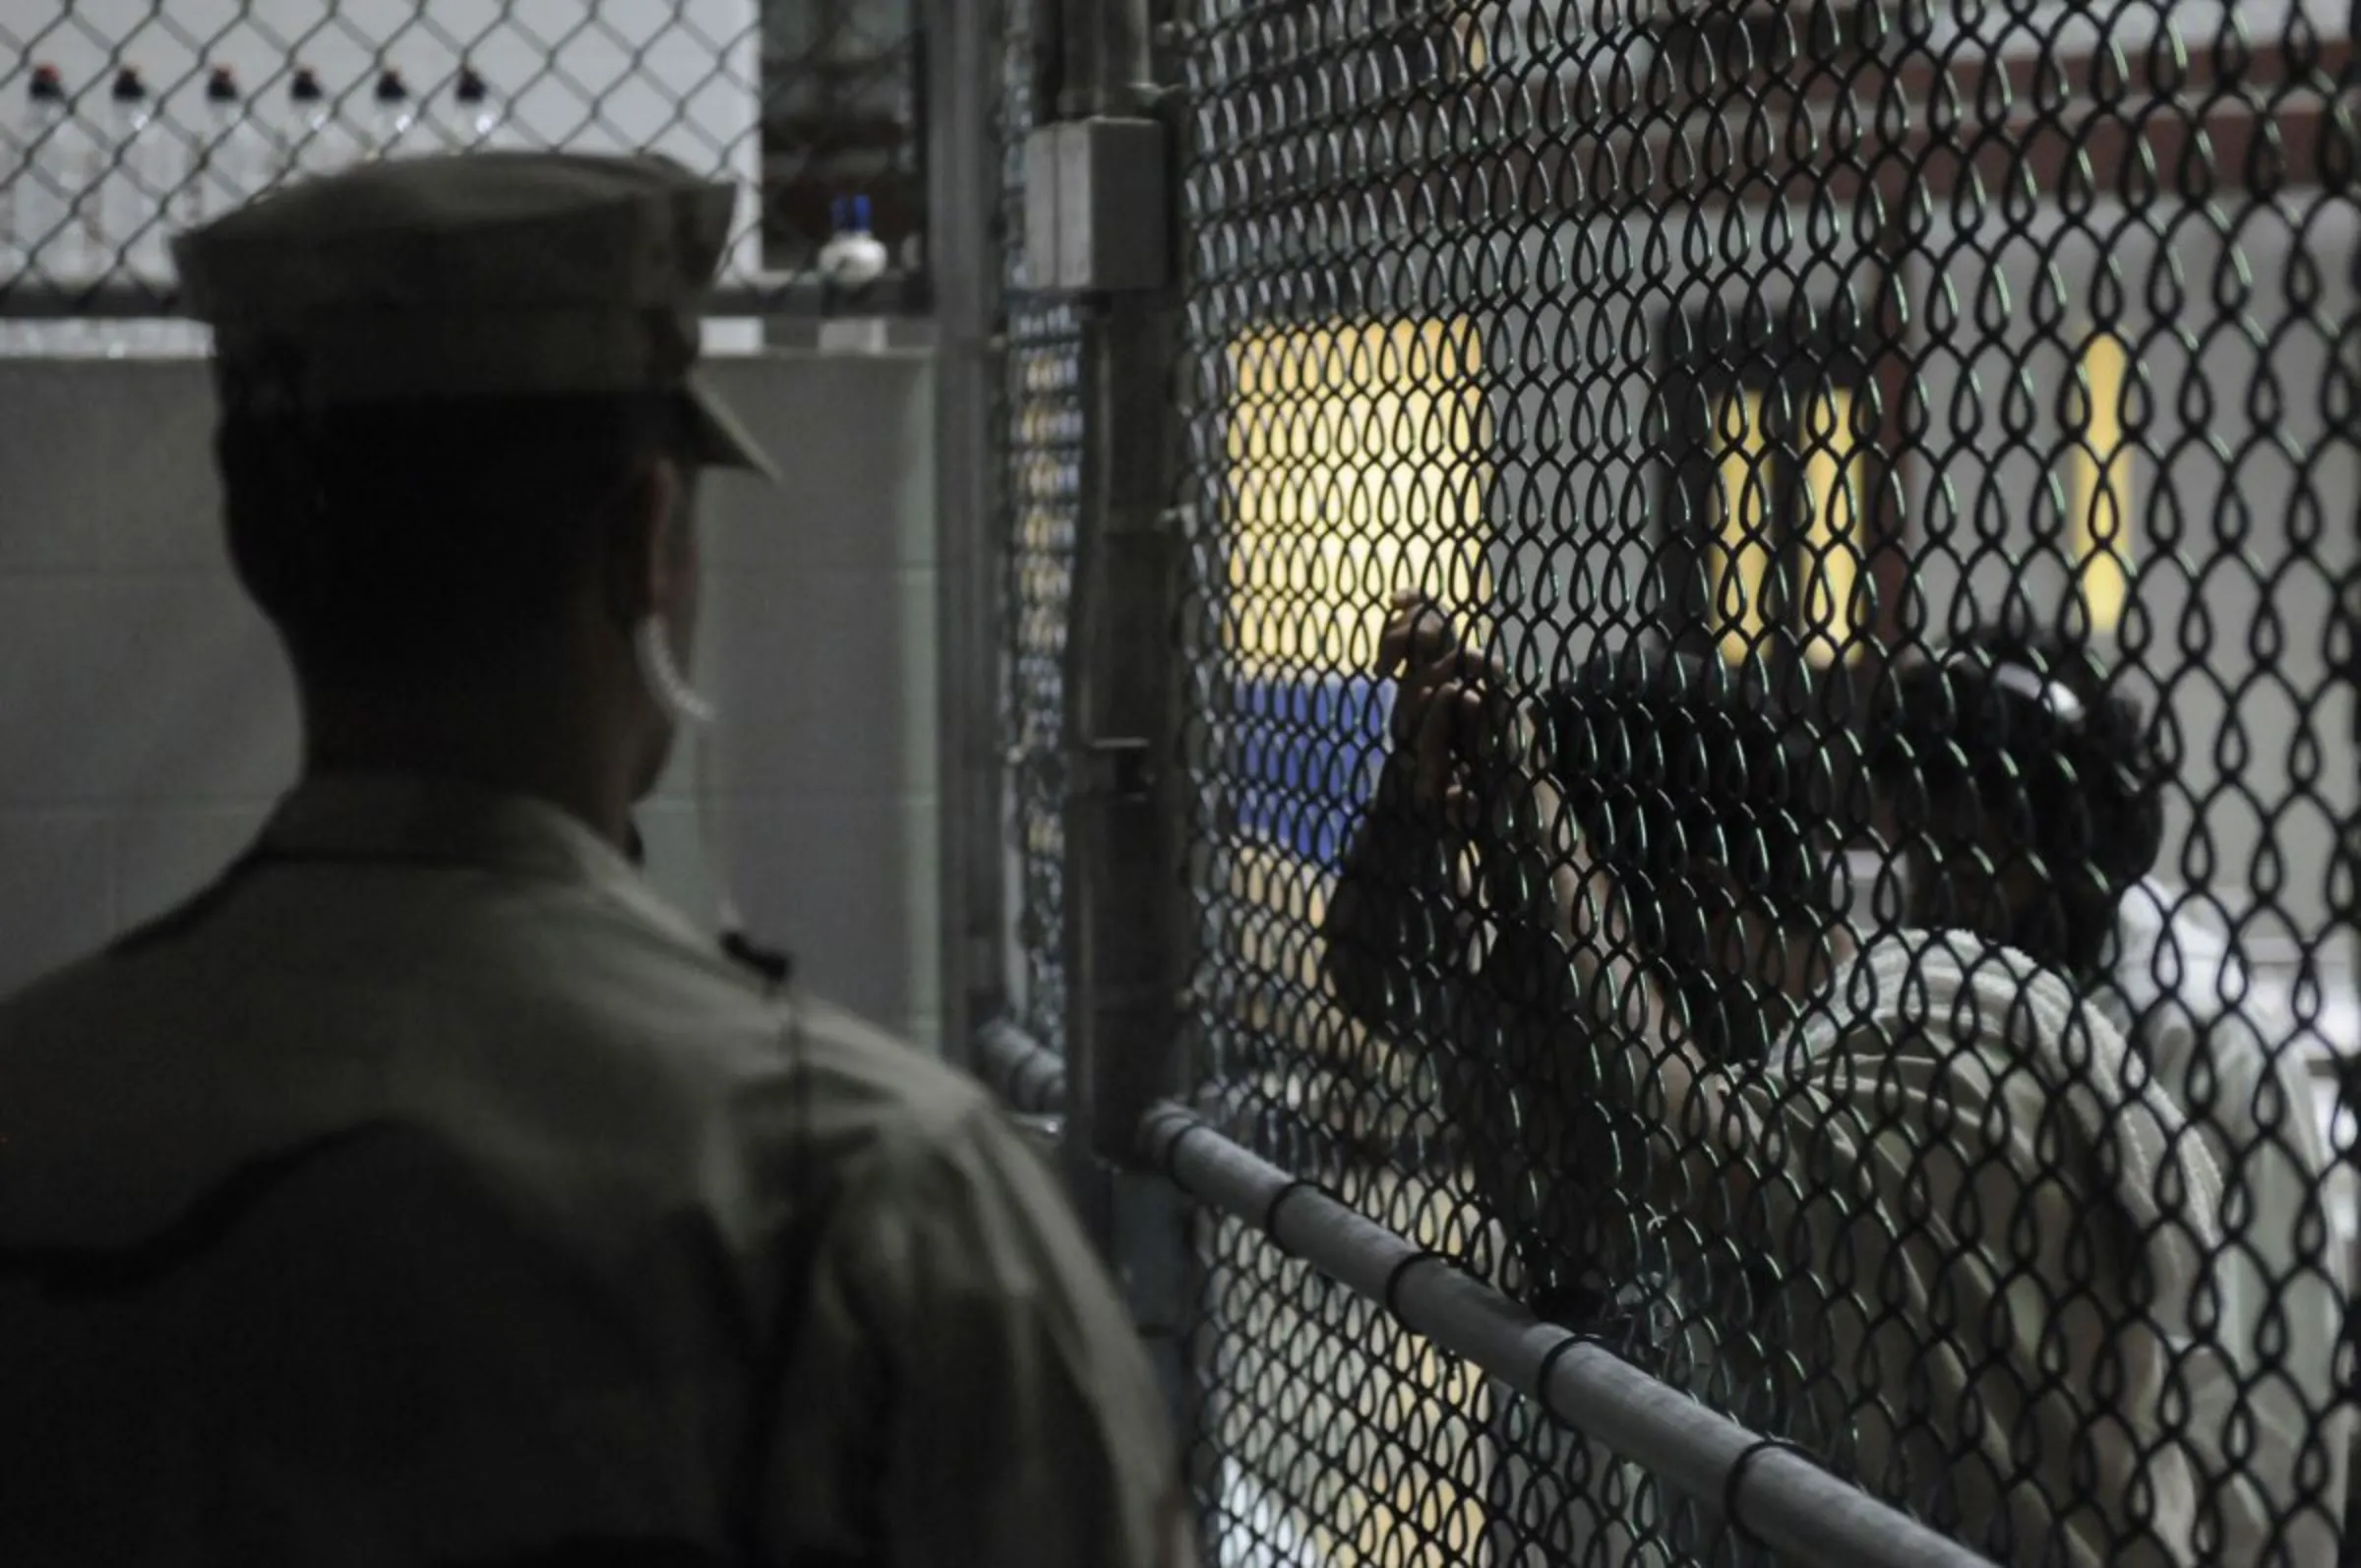 A Sailor assigned to the Navy Expeditionary Guard Battalion stands watch over detainees in a cell block in Camp 6 at Guantanamo Bay naval base in a March 30, 2010. REUTERS/MC3 Joshua Nistas/US Navy/Handout via Reuters